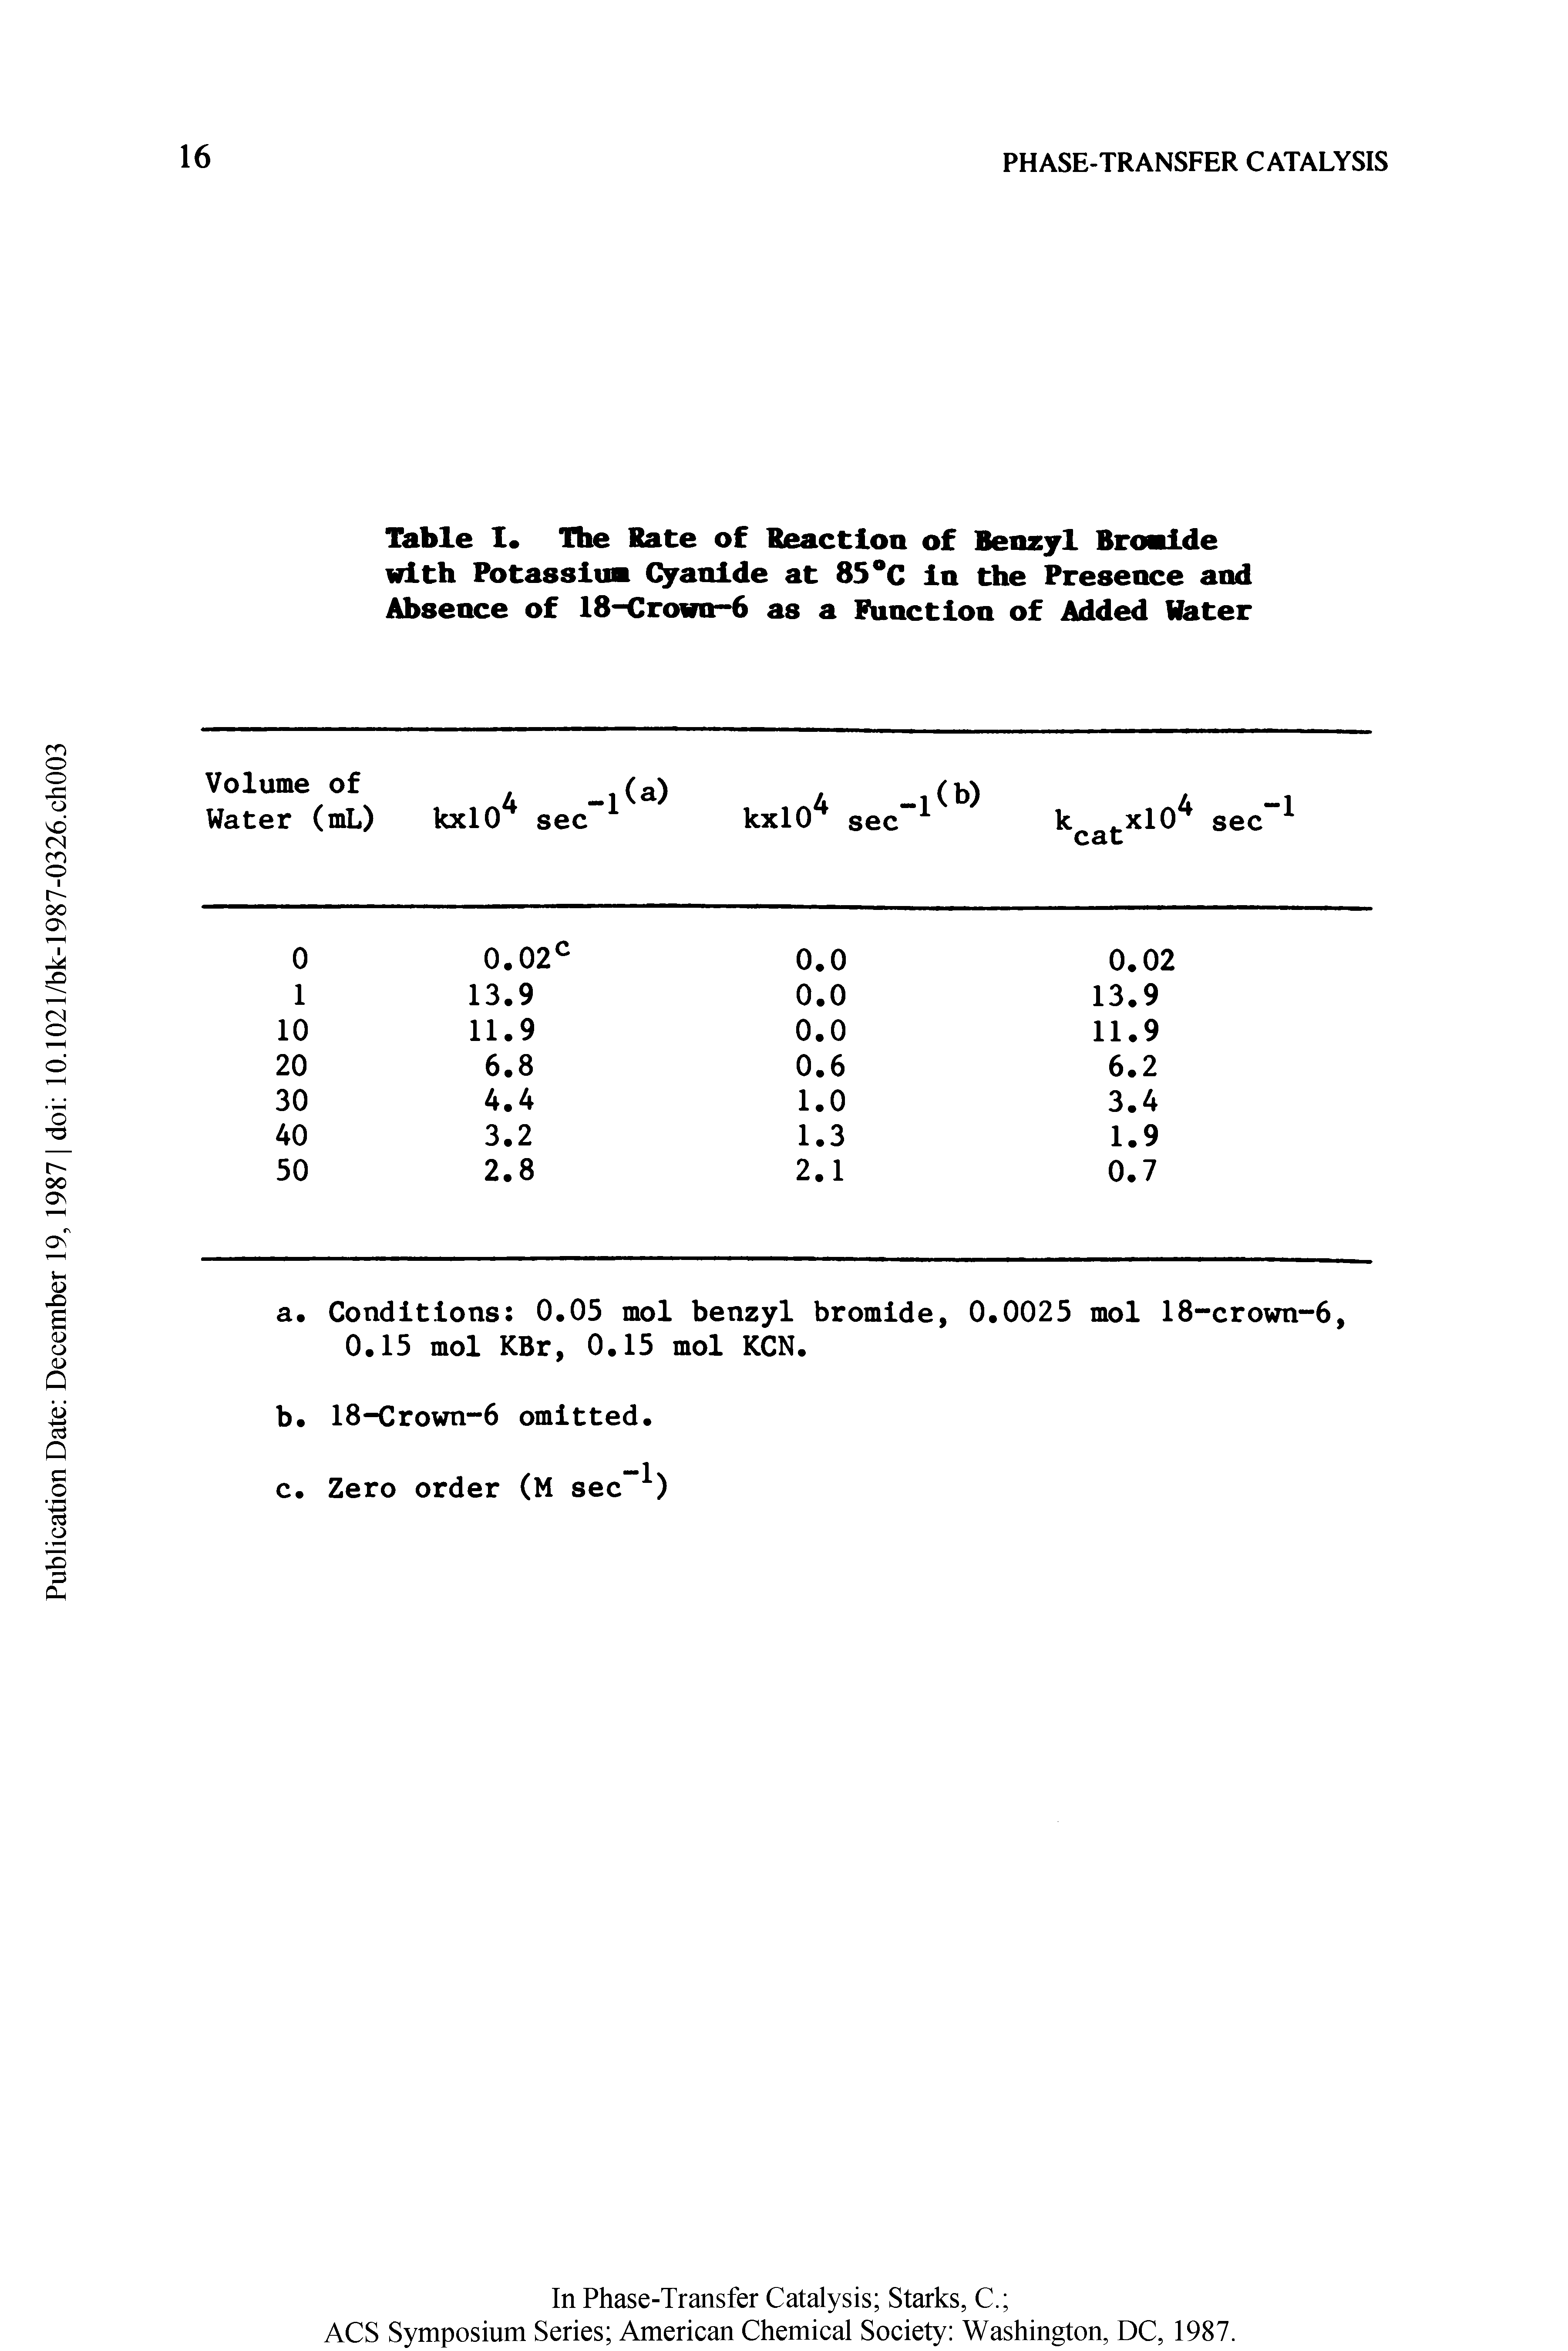 Table X The Rate of Reaction of Benzyl Broalde with Potasslua Cyanide at 85 C In the Presence and Absence of 18-Crown 6 as a Function of Added Water...